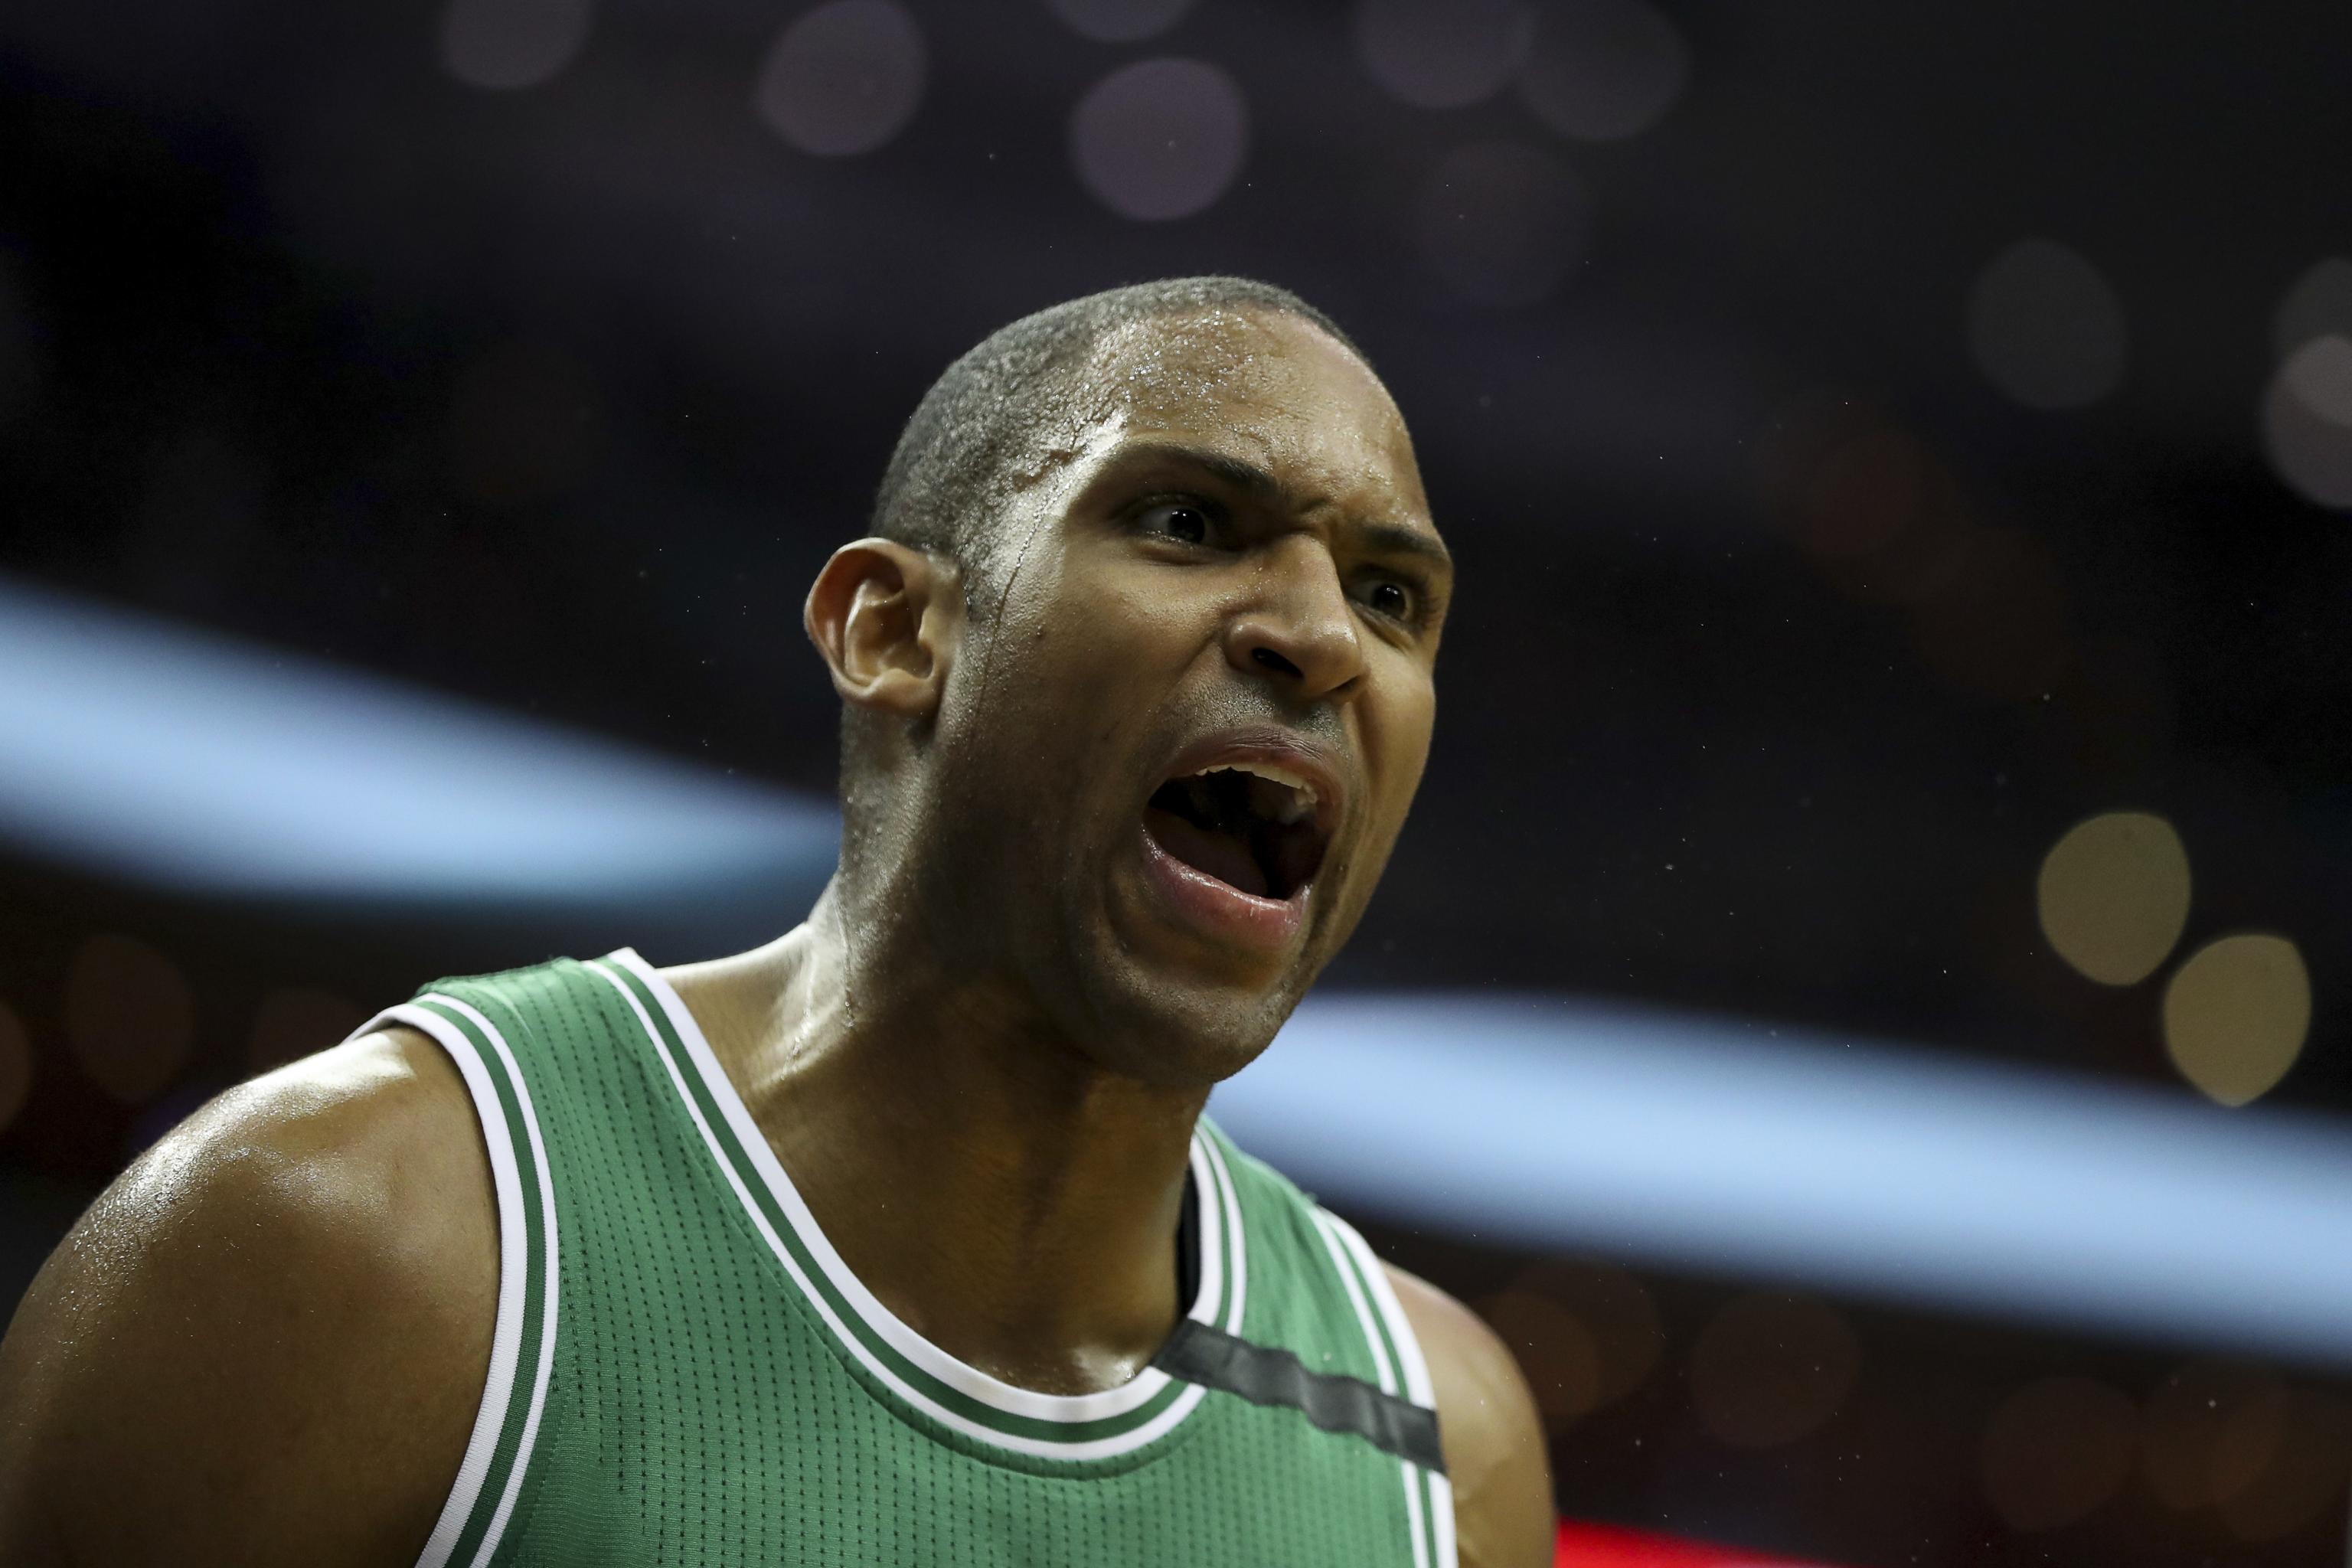 Boston's Al Horford OUT for 2023 FIBA World Cup play with Dominican Republic